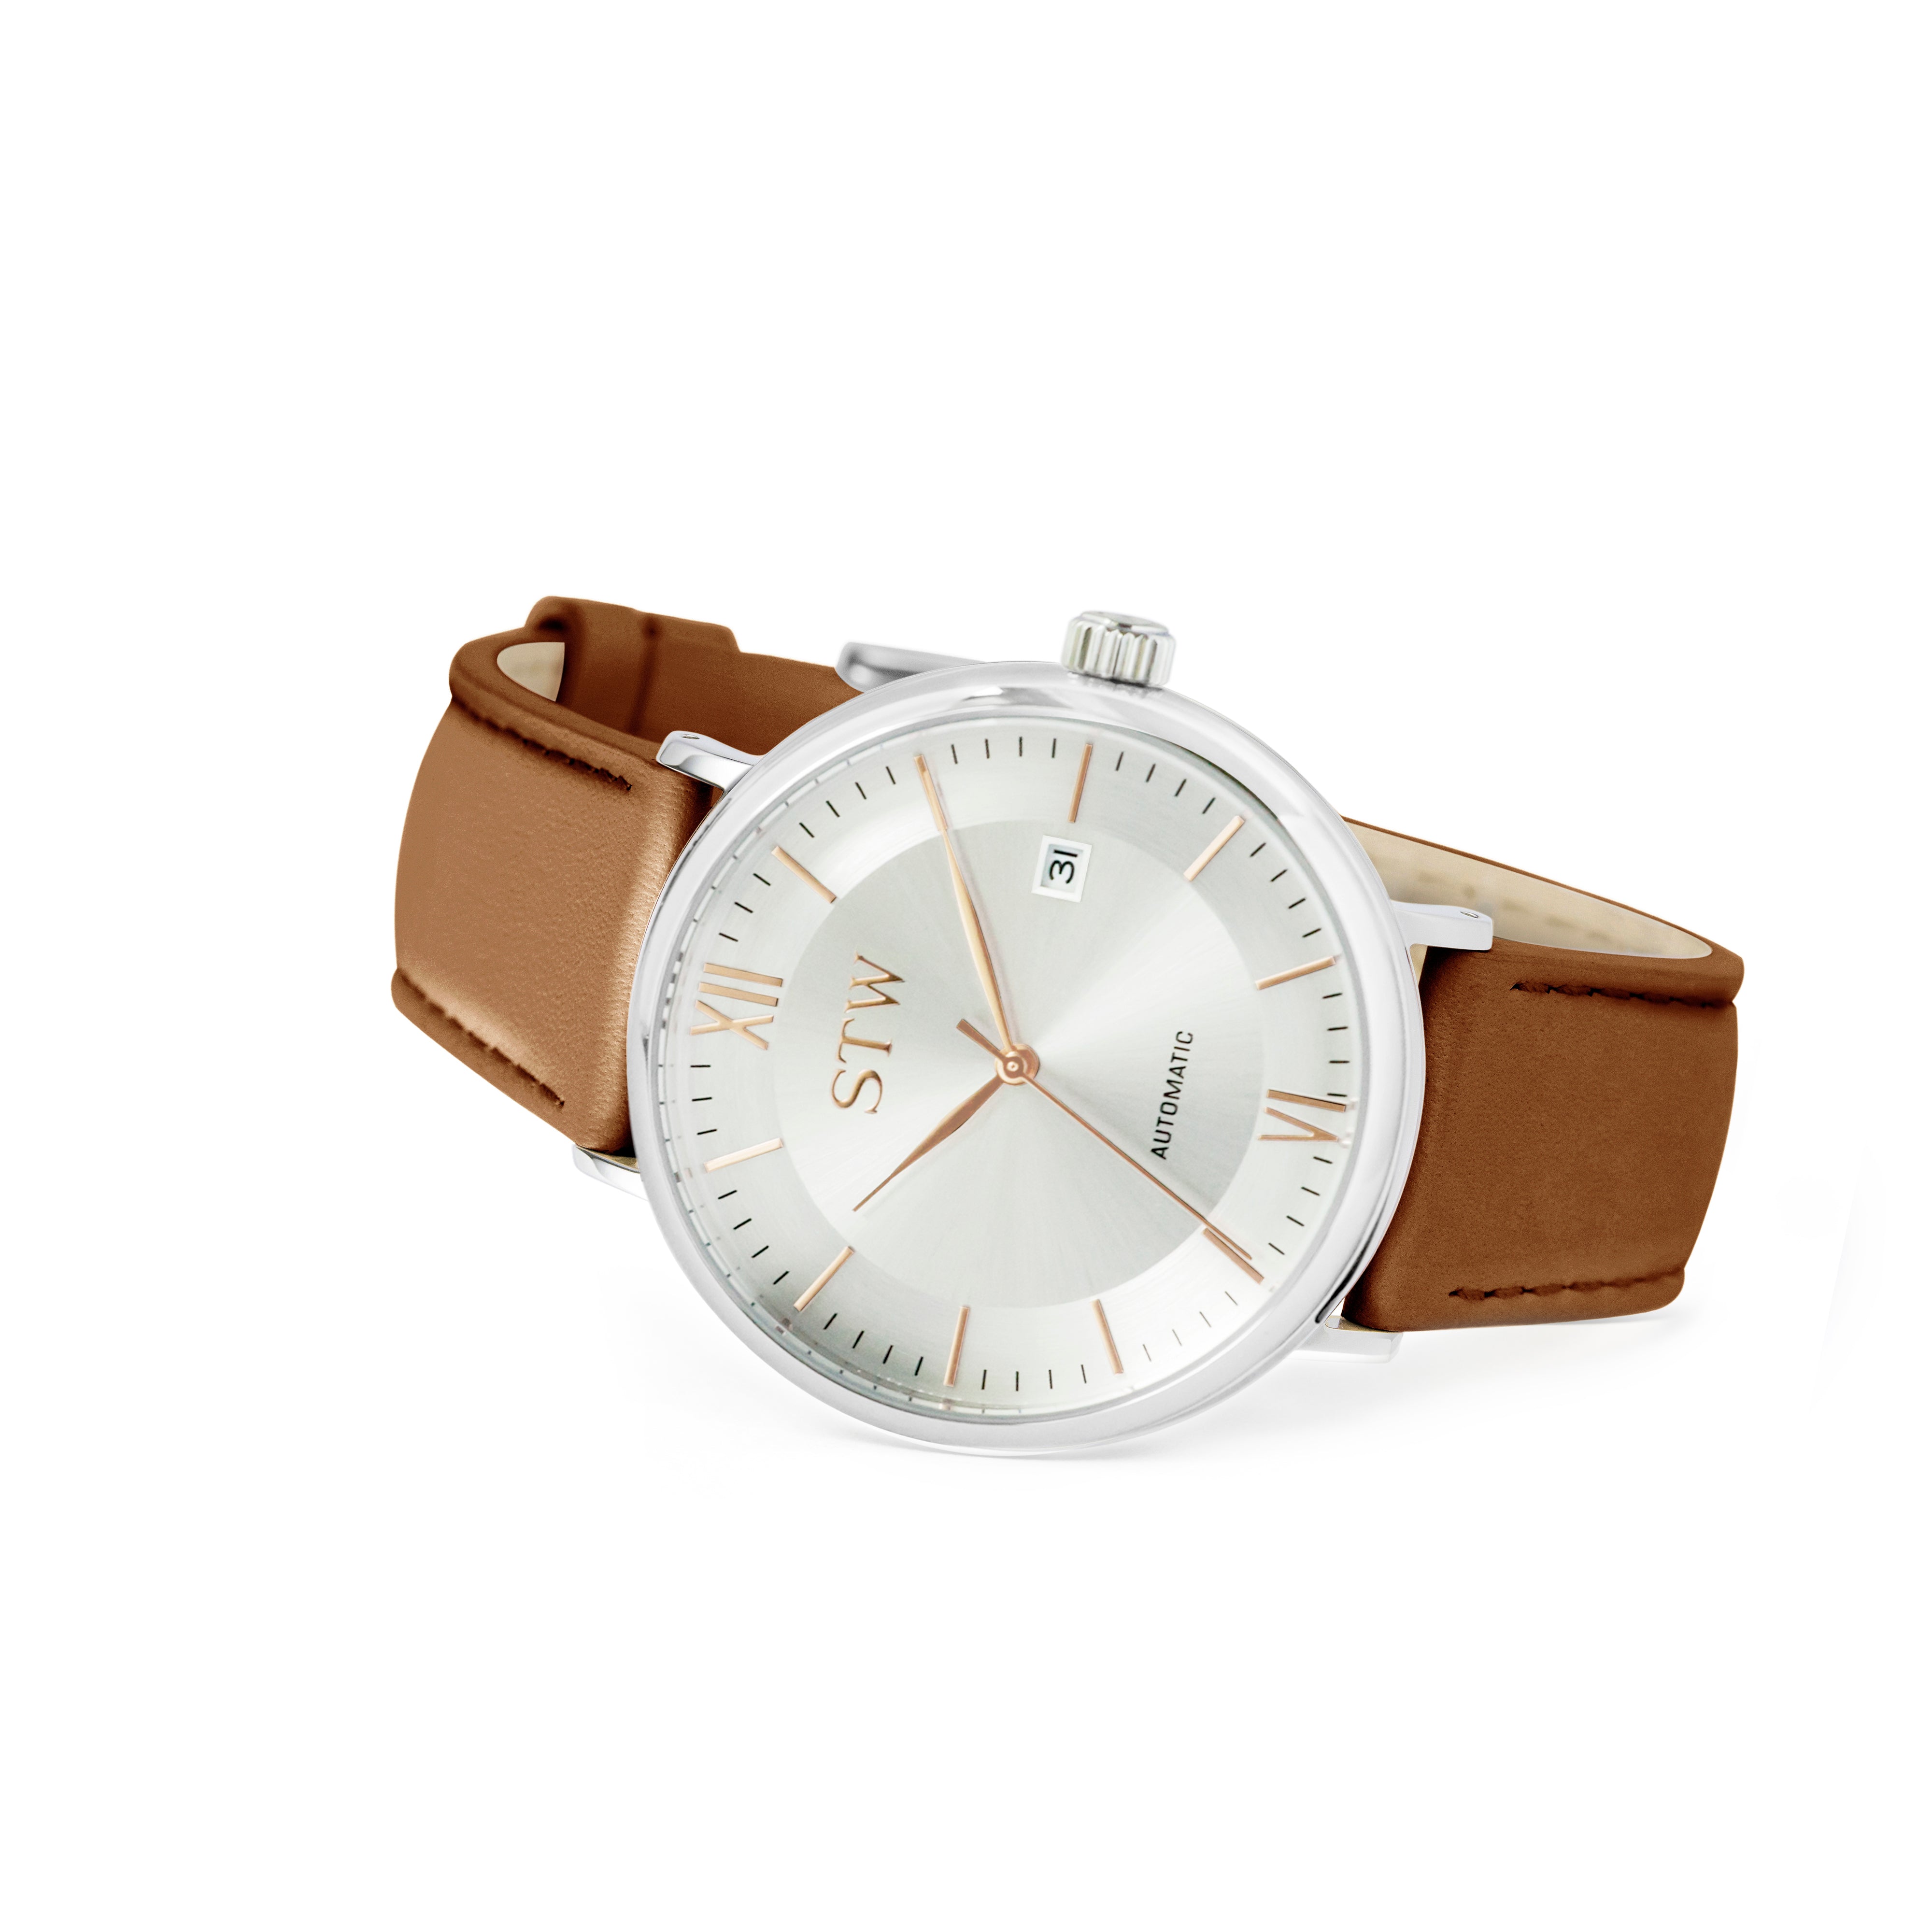 THE AUTO -  SILVER DIAL / BROWN LEATHER STRAP WATCH